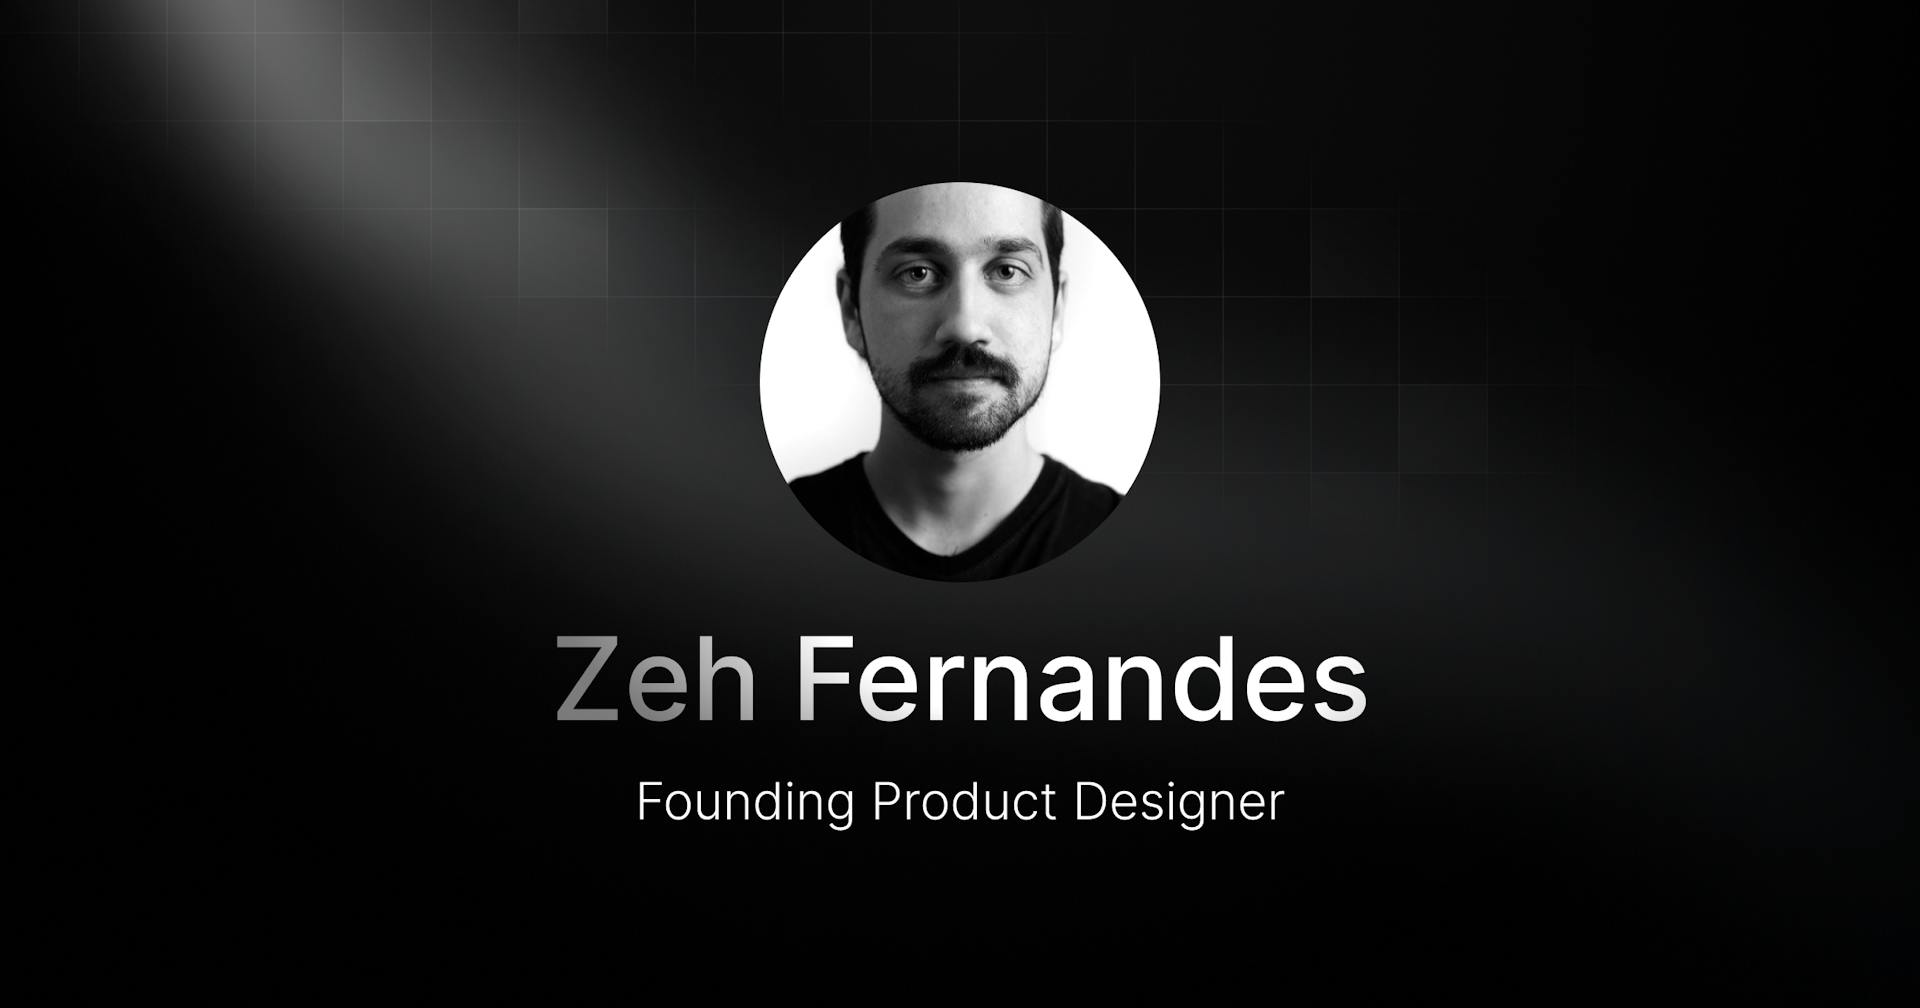 Welcoming Zeh Fernandes, our new Product Designer